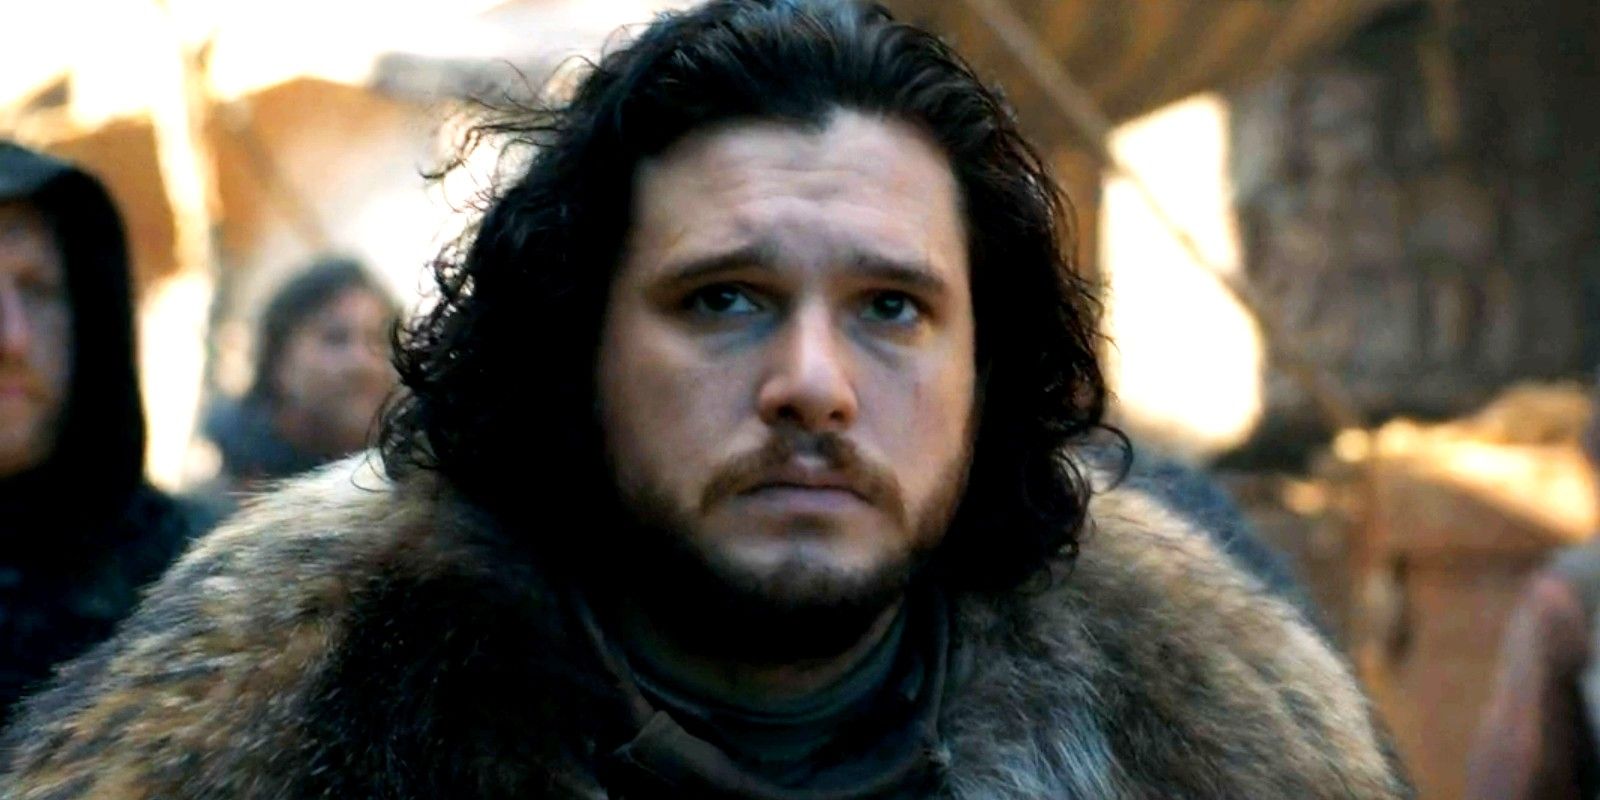 Jon Snow Spinoff Poster Teases Warg Powers That Game Of Thrones Barely Touched On